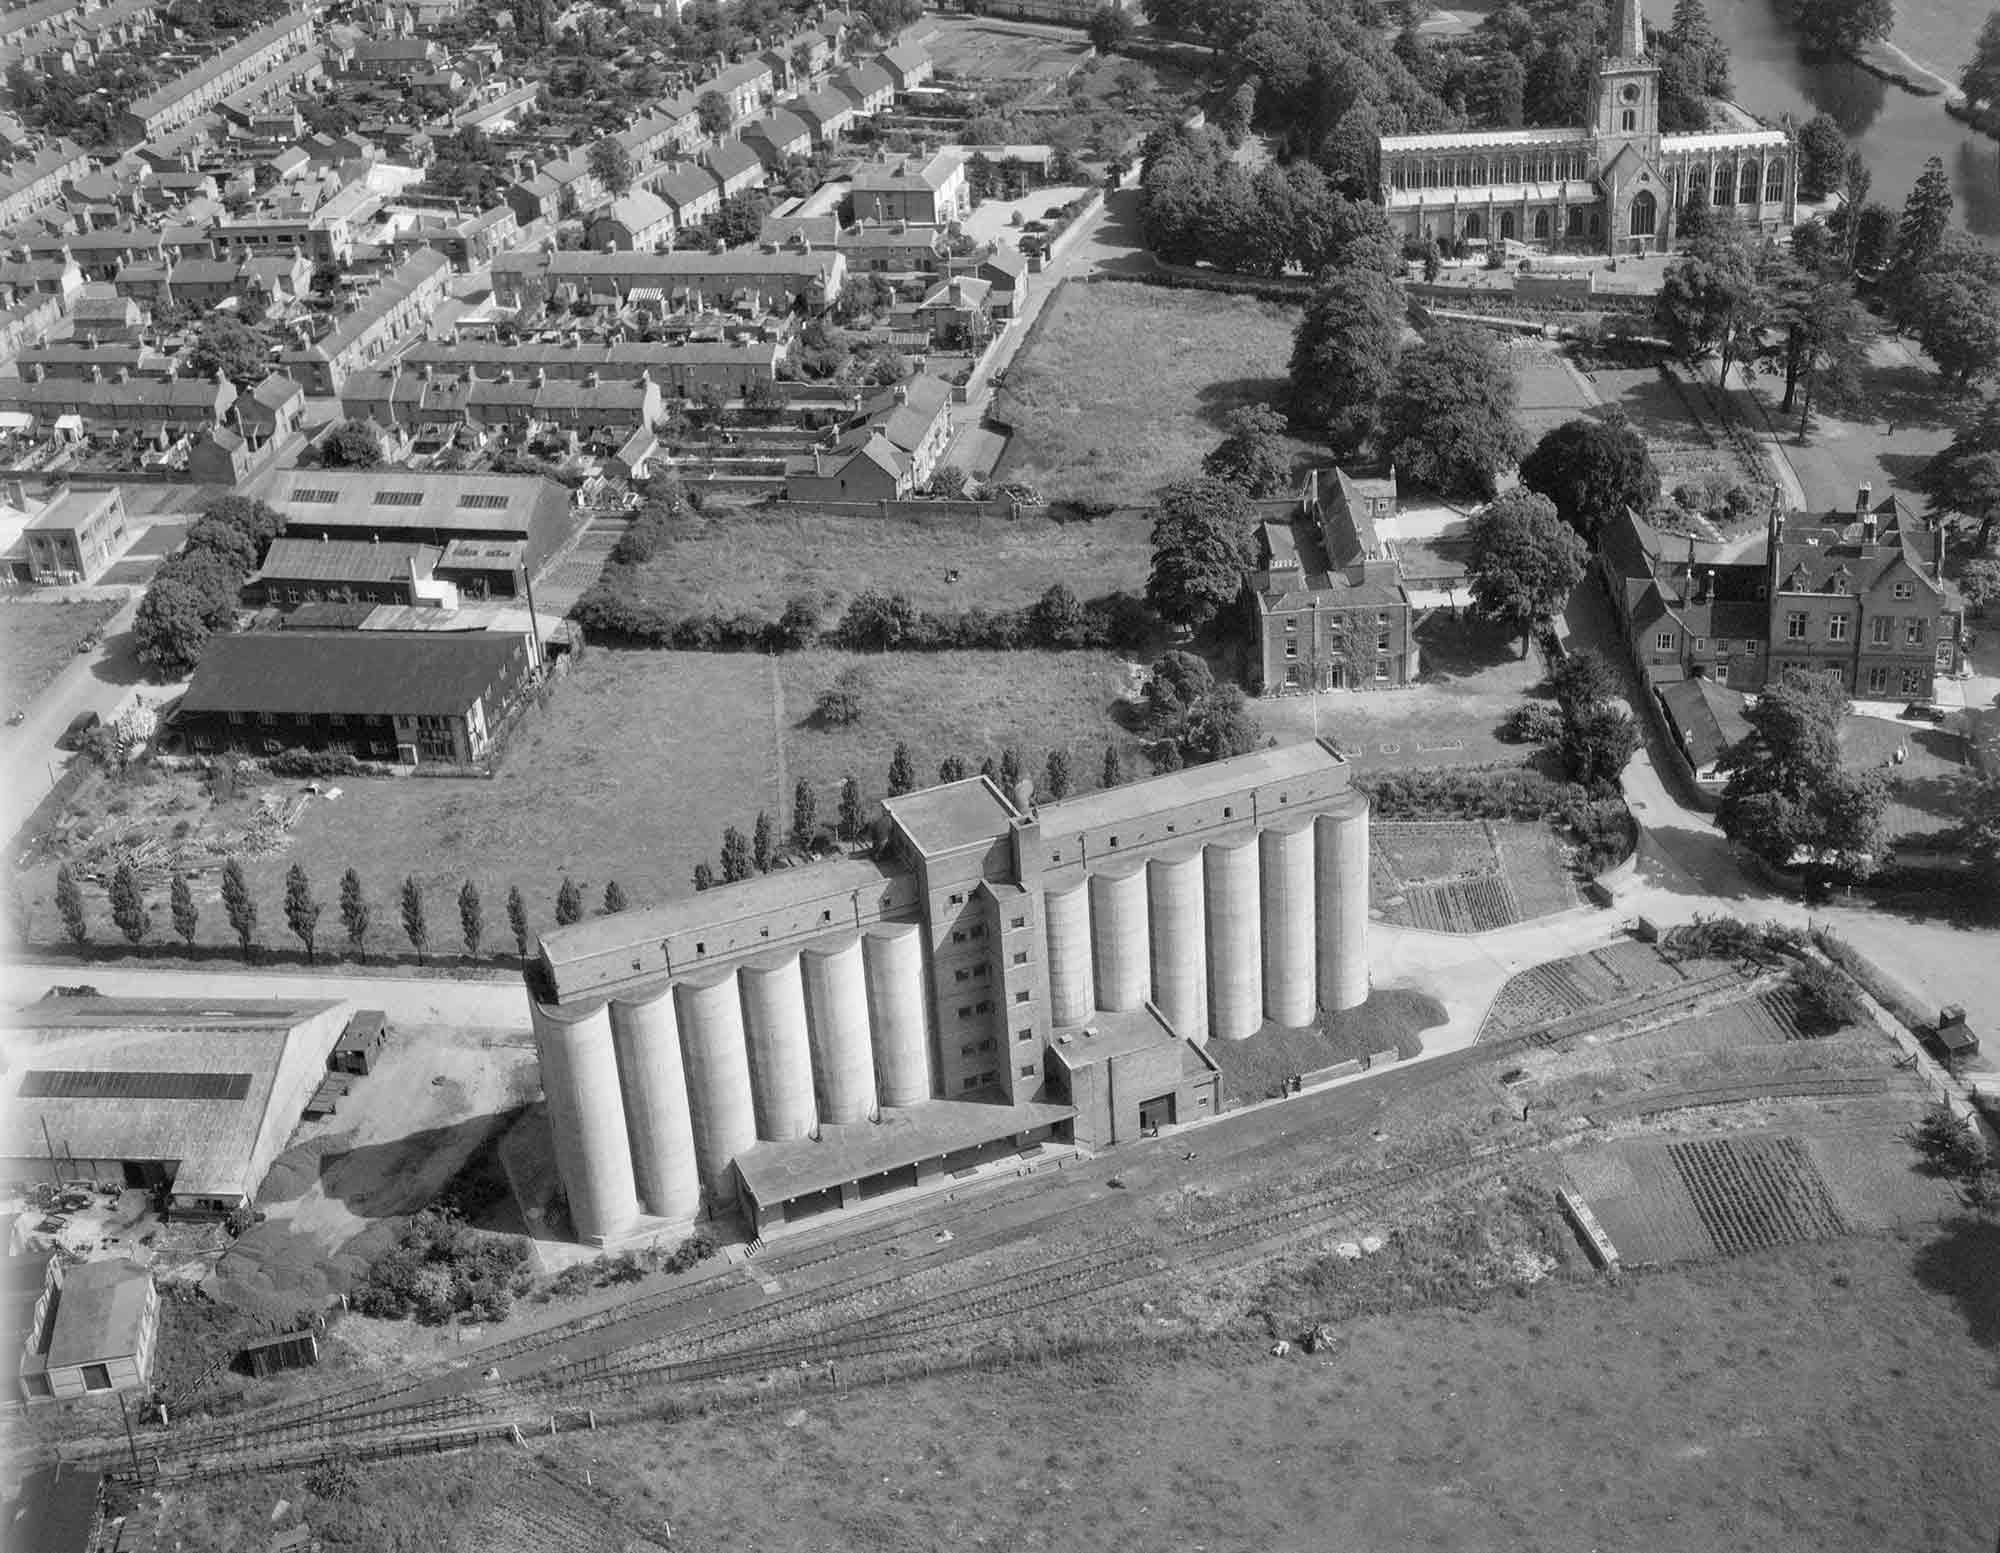 Black and white oblique aerial photograph of a concrete grain silo. The tall silo, which has twelve upright cylinder-like segments to its front, stands in the middle foreground. It is fronted by a railway siding and another track that crosses the front of the photograph. Behind and to the right of the silo are two large, detached houses, and behind to the left are streets with various domestic and other buildings. In the top-right corner is a large gothic church with a tower topped with a spire that is truncated by the edge of the photograph.